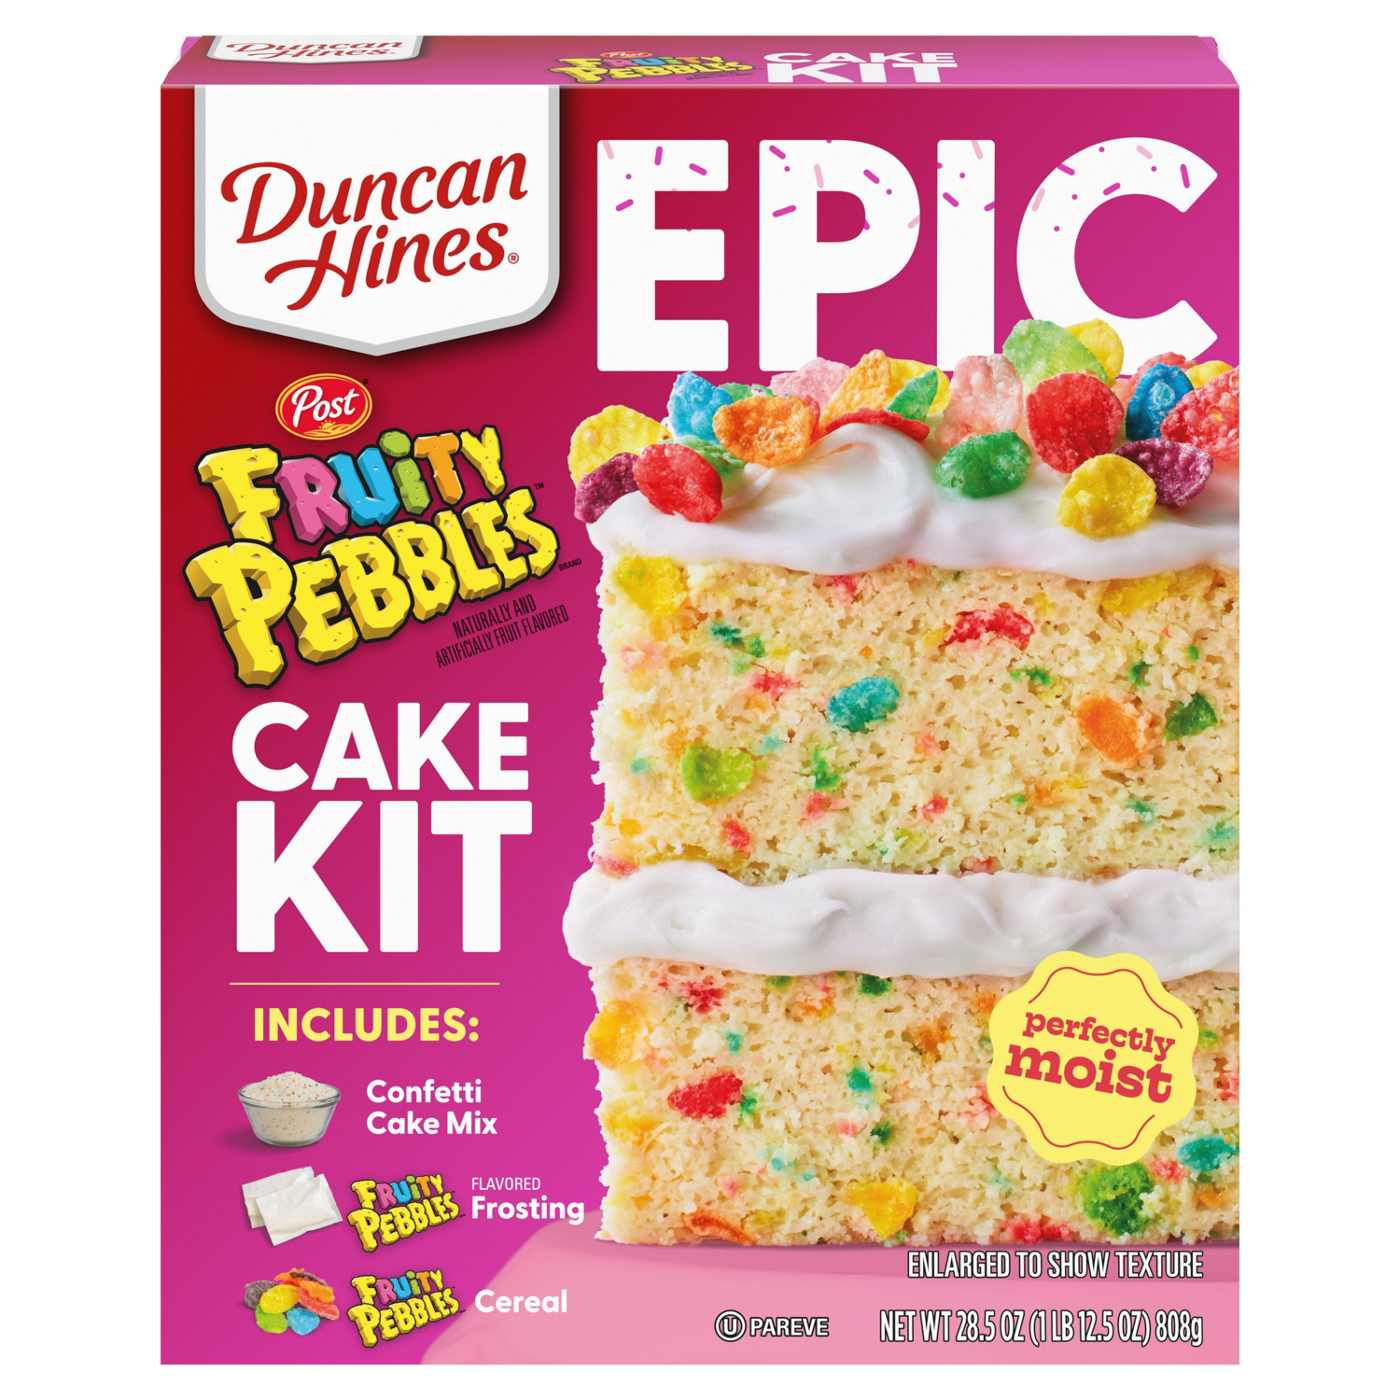 Duncan Hines EPIC Fruity Pebbles Cake Mix Kit; image 1 of 7